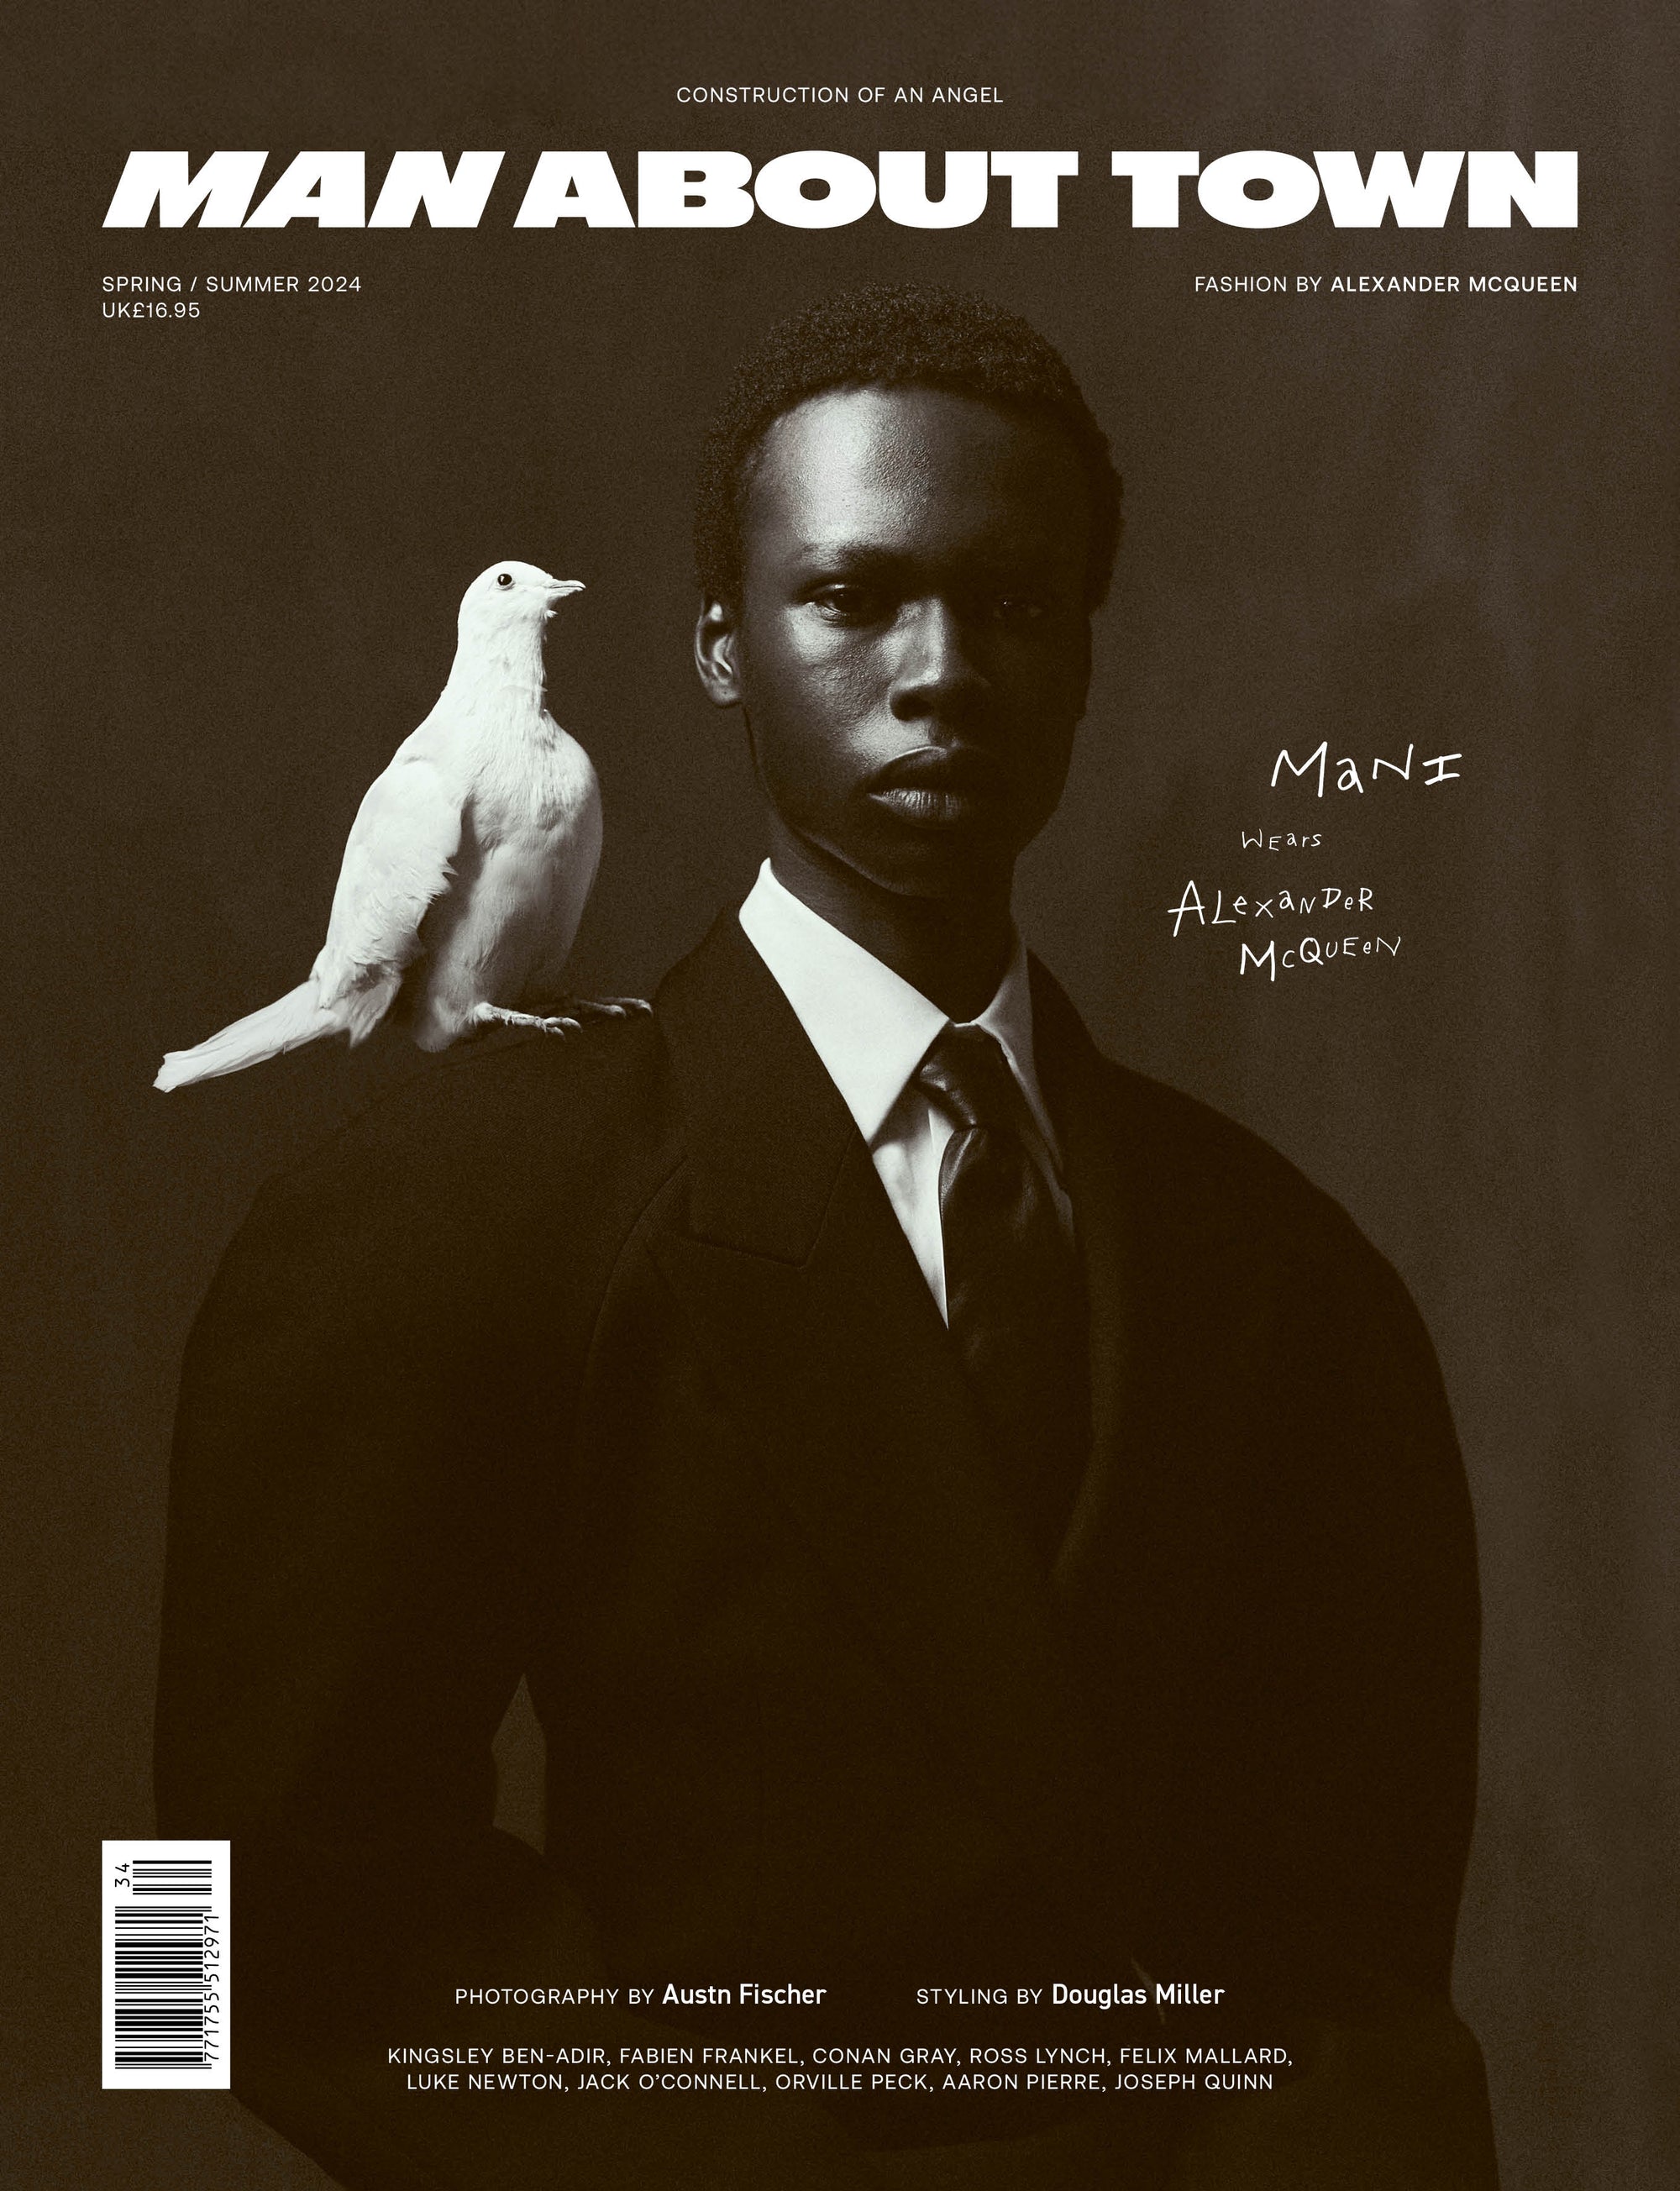 Mani Adjaye Covers Man About Town's Spring/Summer 2024 Issue